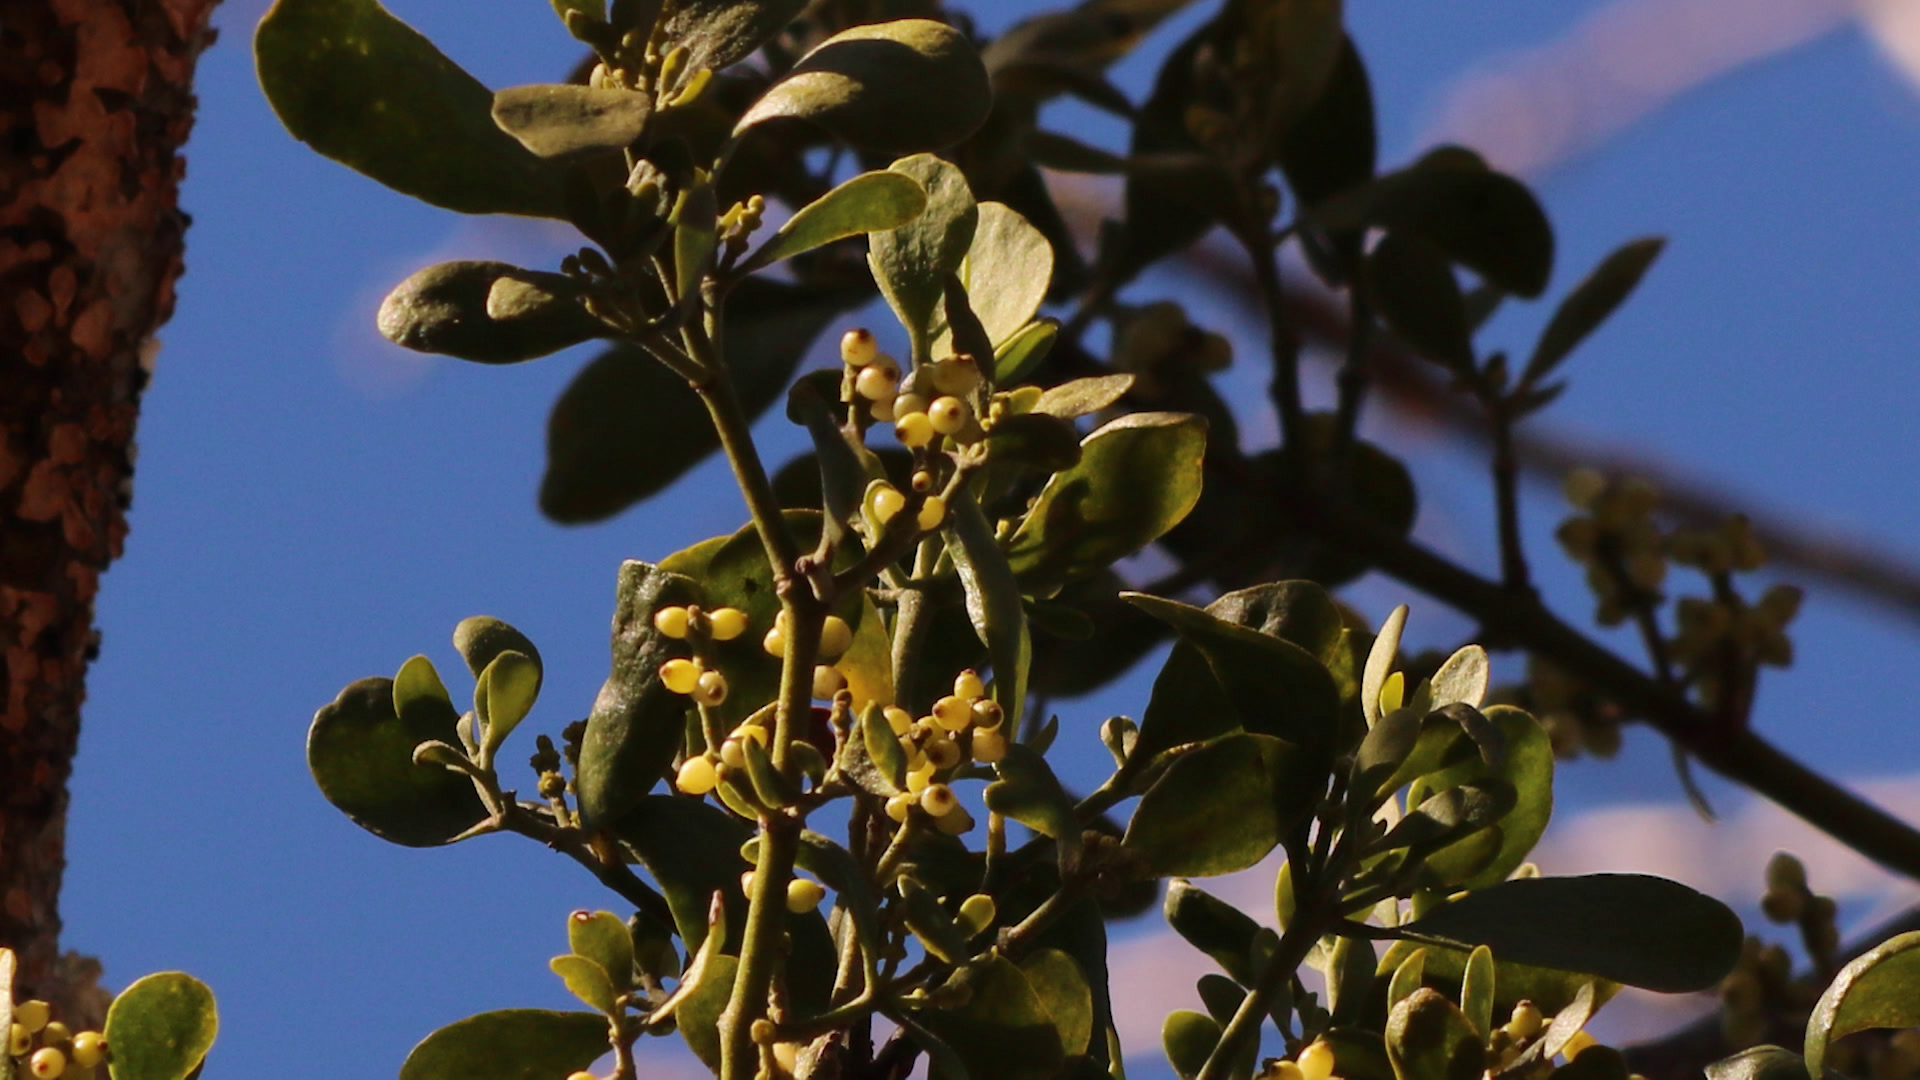 Did You Know Mistletoe Grows On Trees?